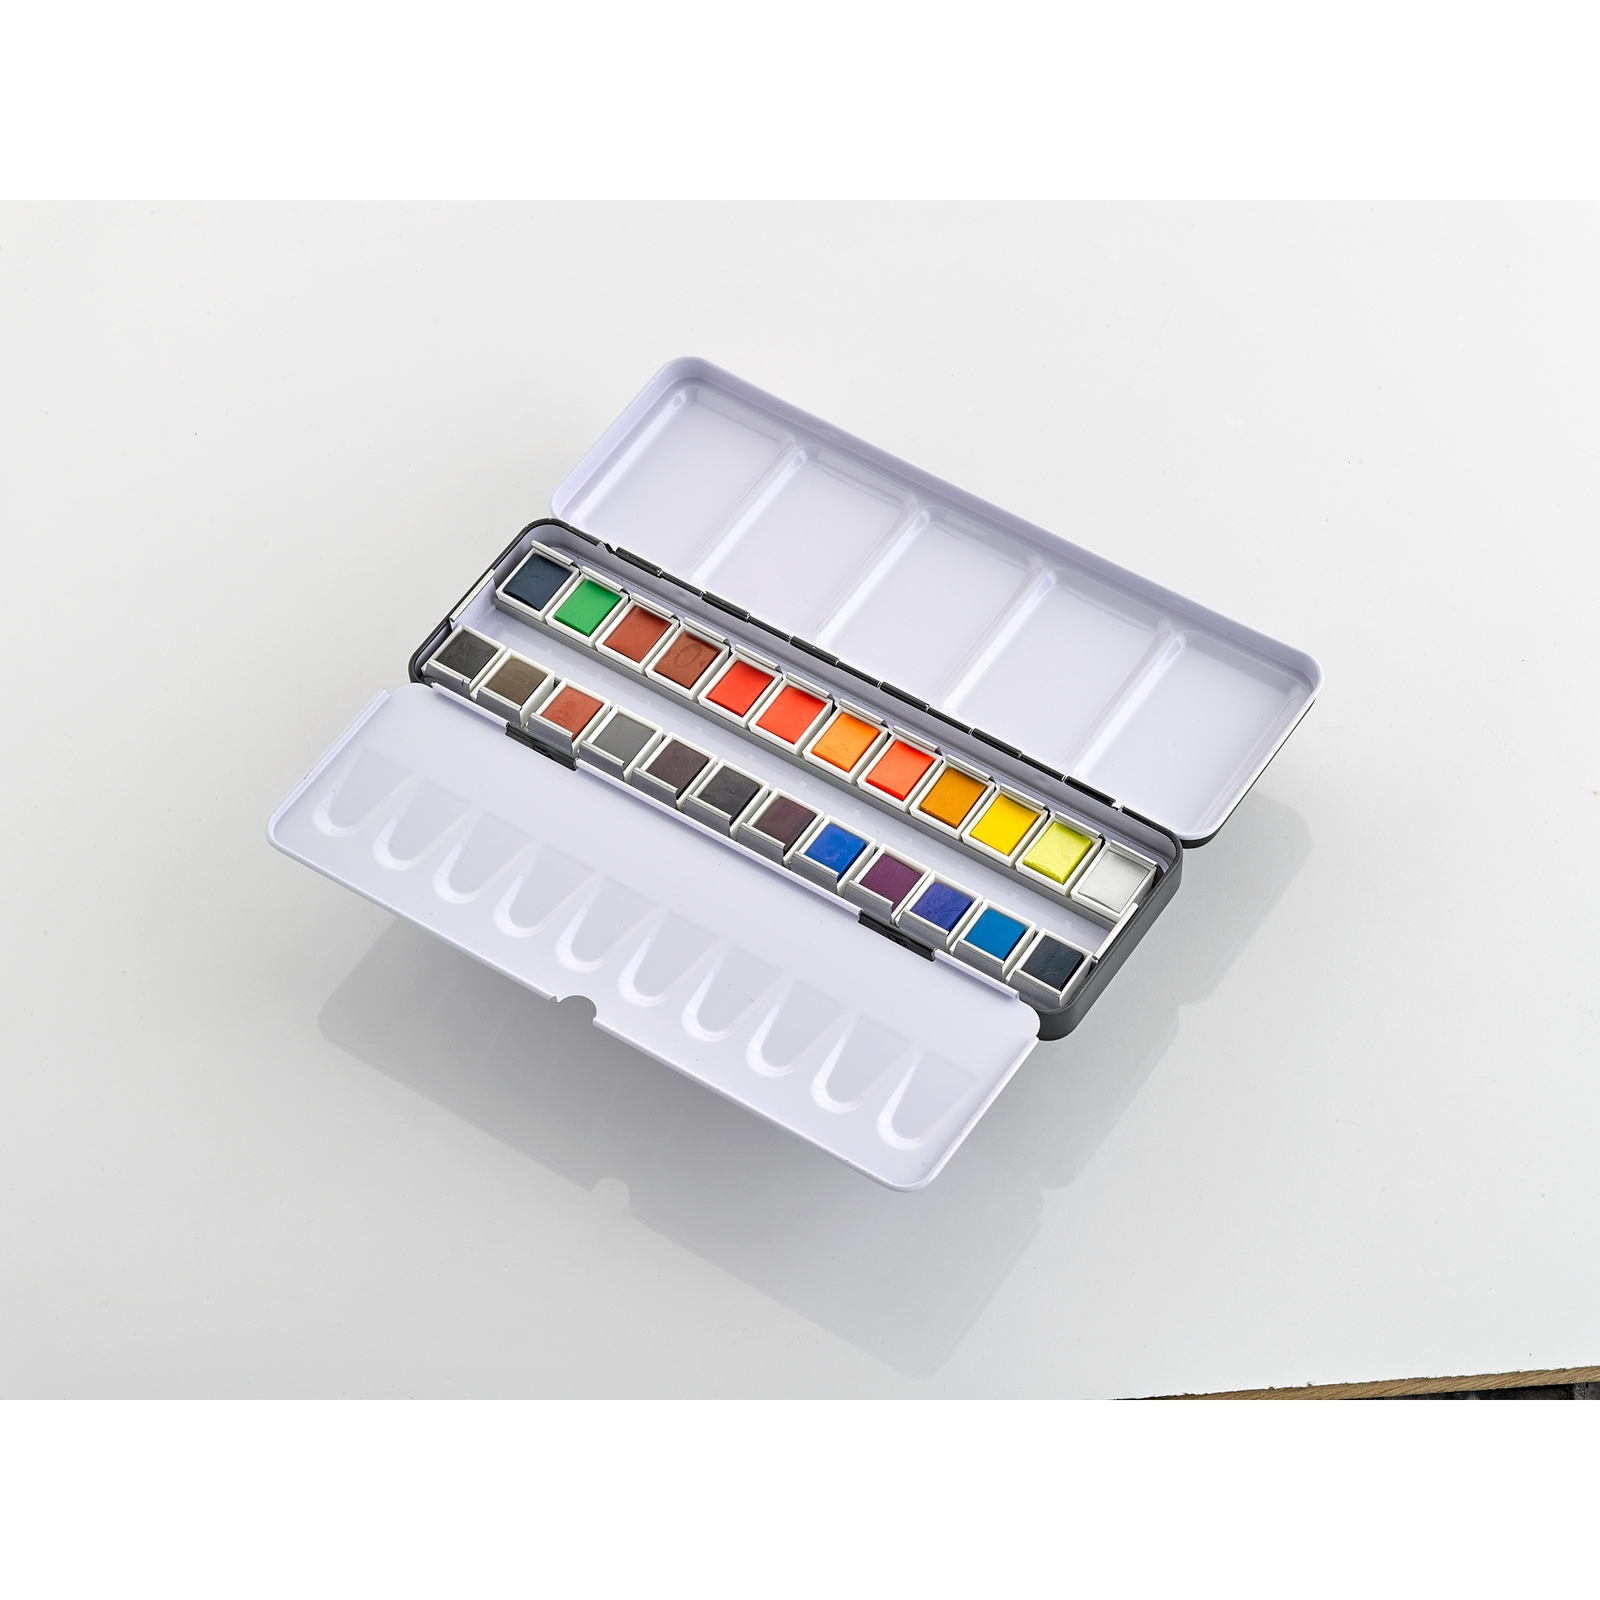 Specialist Crafts Watercolour Pan Sets